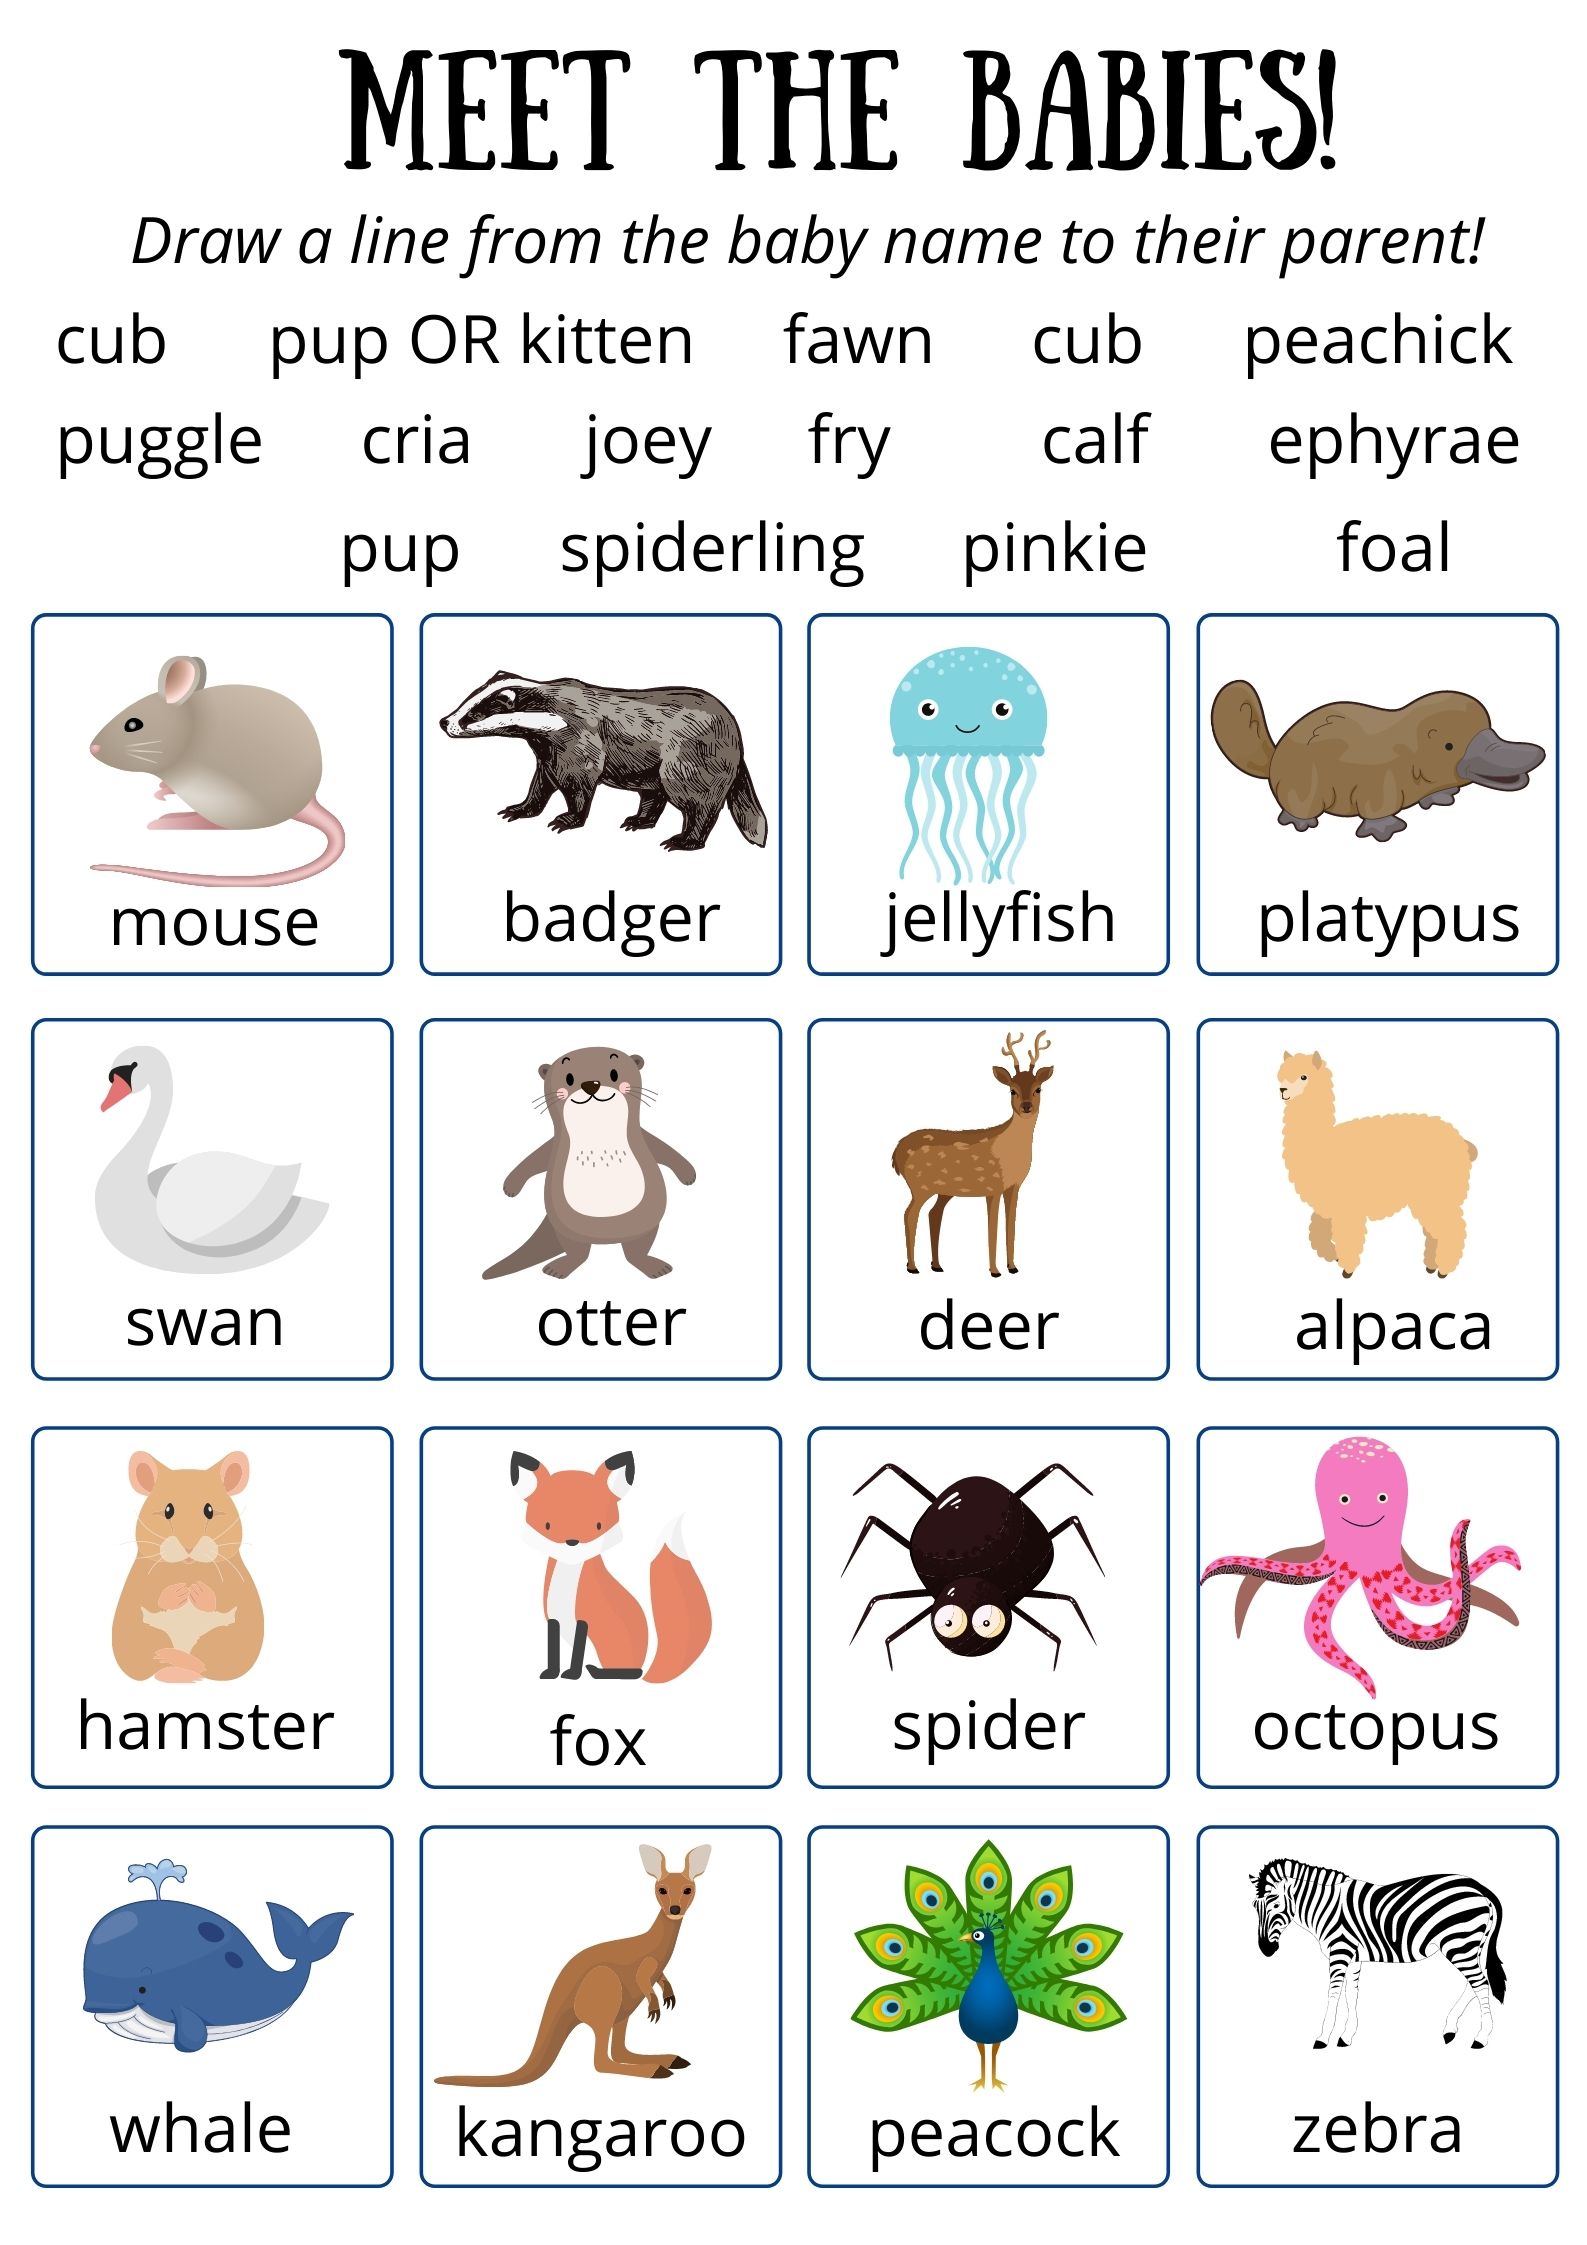 Otter Day Activities {PDF} - Curious Little Monkeys Educational Resources